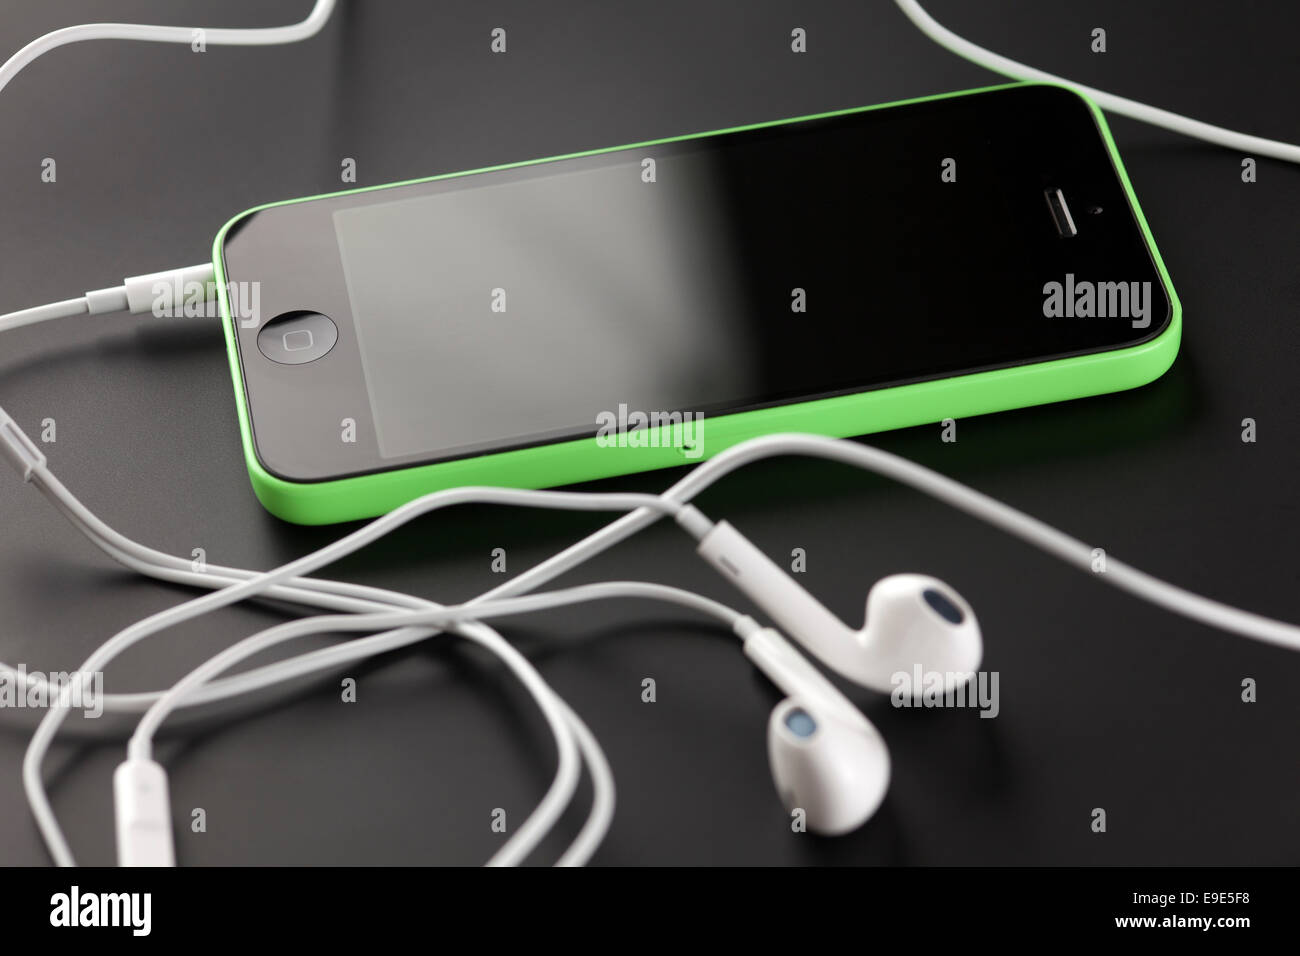 Tambov, Russian Federation - October 16, 2013: Apple iPhone 5C Green Color, Apple EarPods on black background. Stock Photo